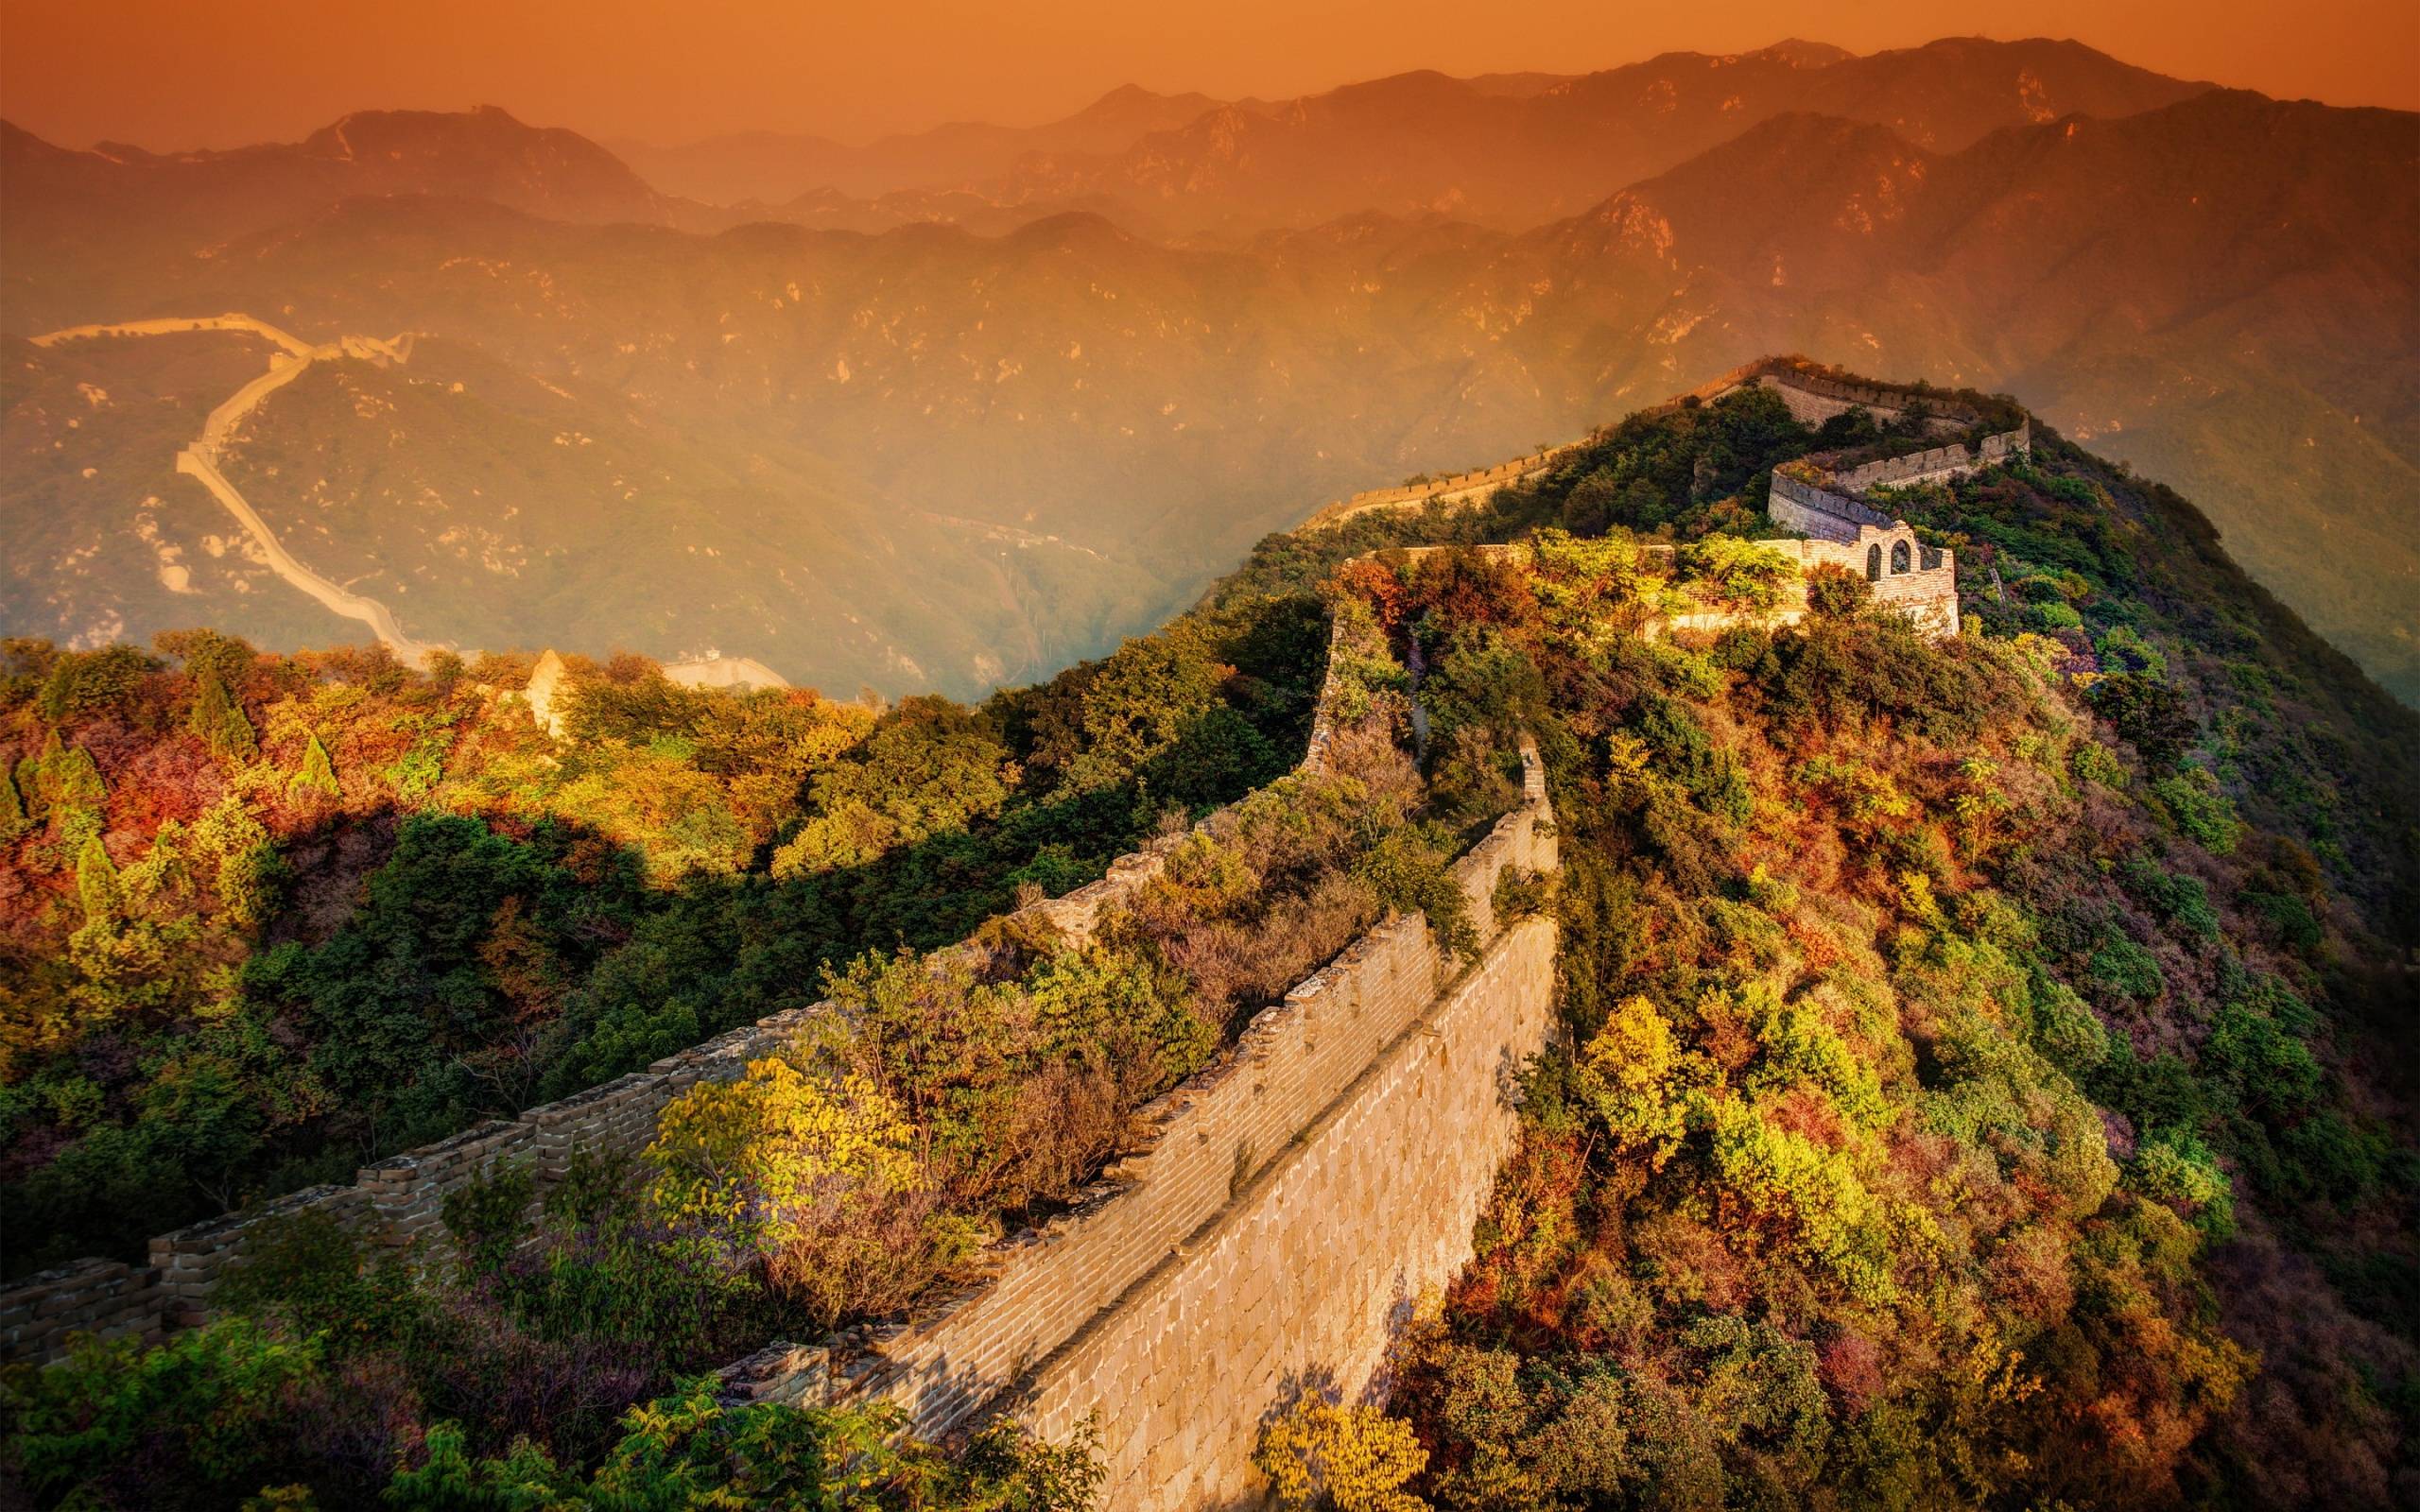 Sunset In Great Wall Of China Wallpaper, Travel Wallpaper